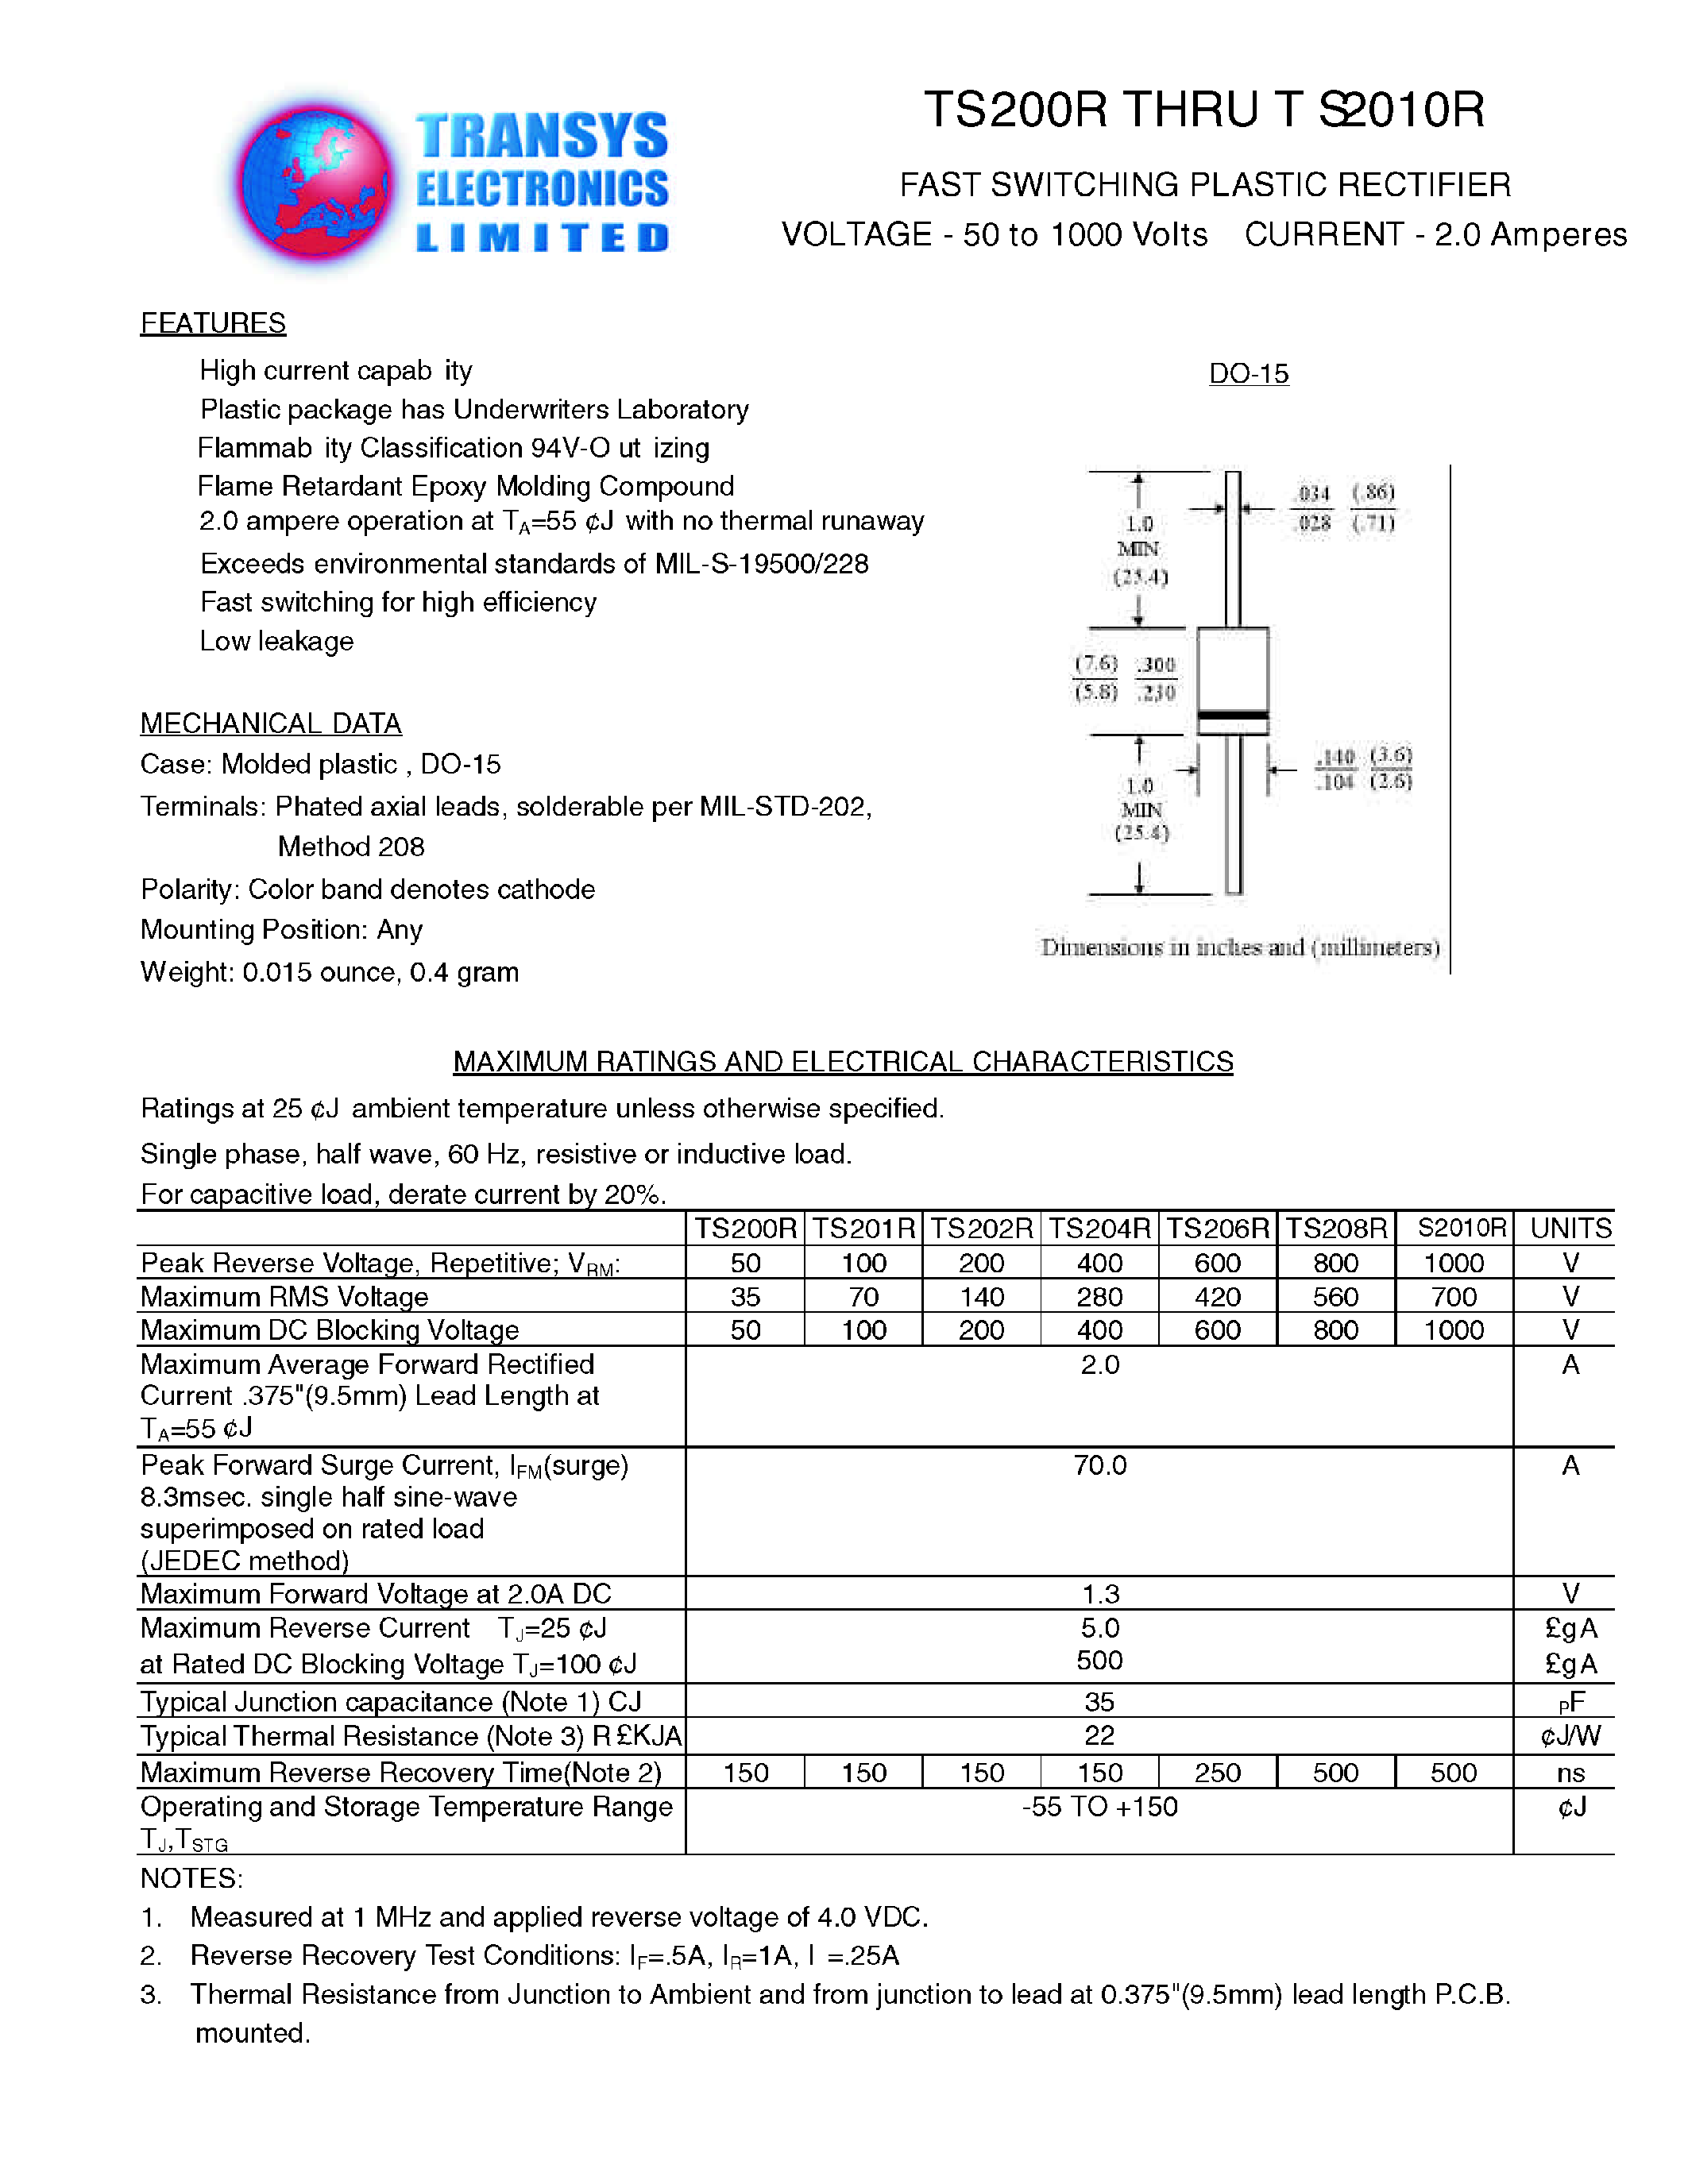 Datasheet TS210R - FAST SWITCHIING RECTIFIER(Reverse Voltage - 50 to 1000 Volts/ Current - 2.0Ampere) page 1